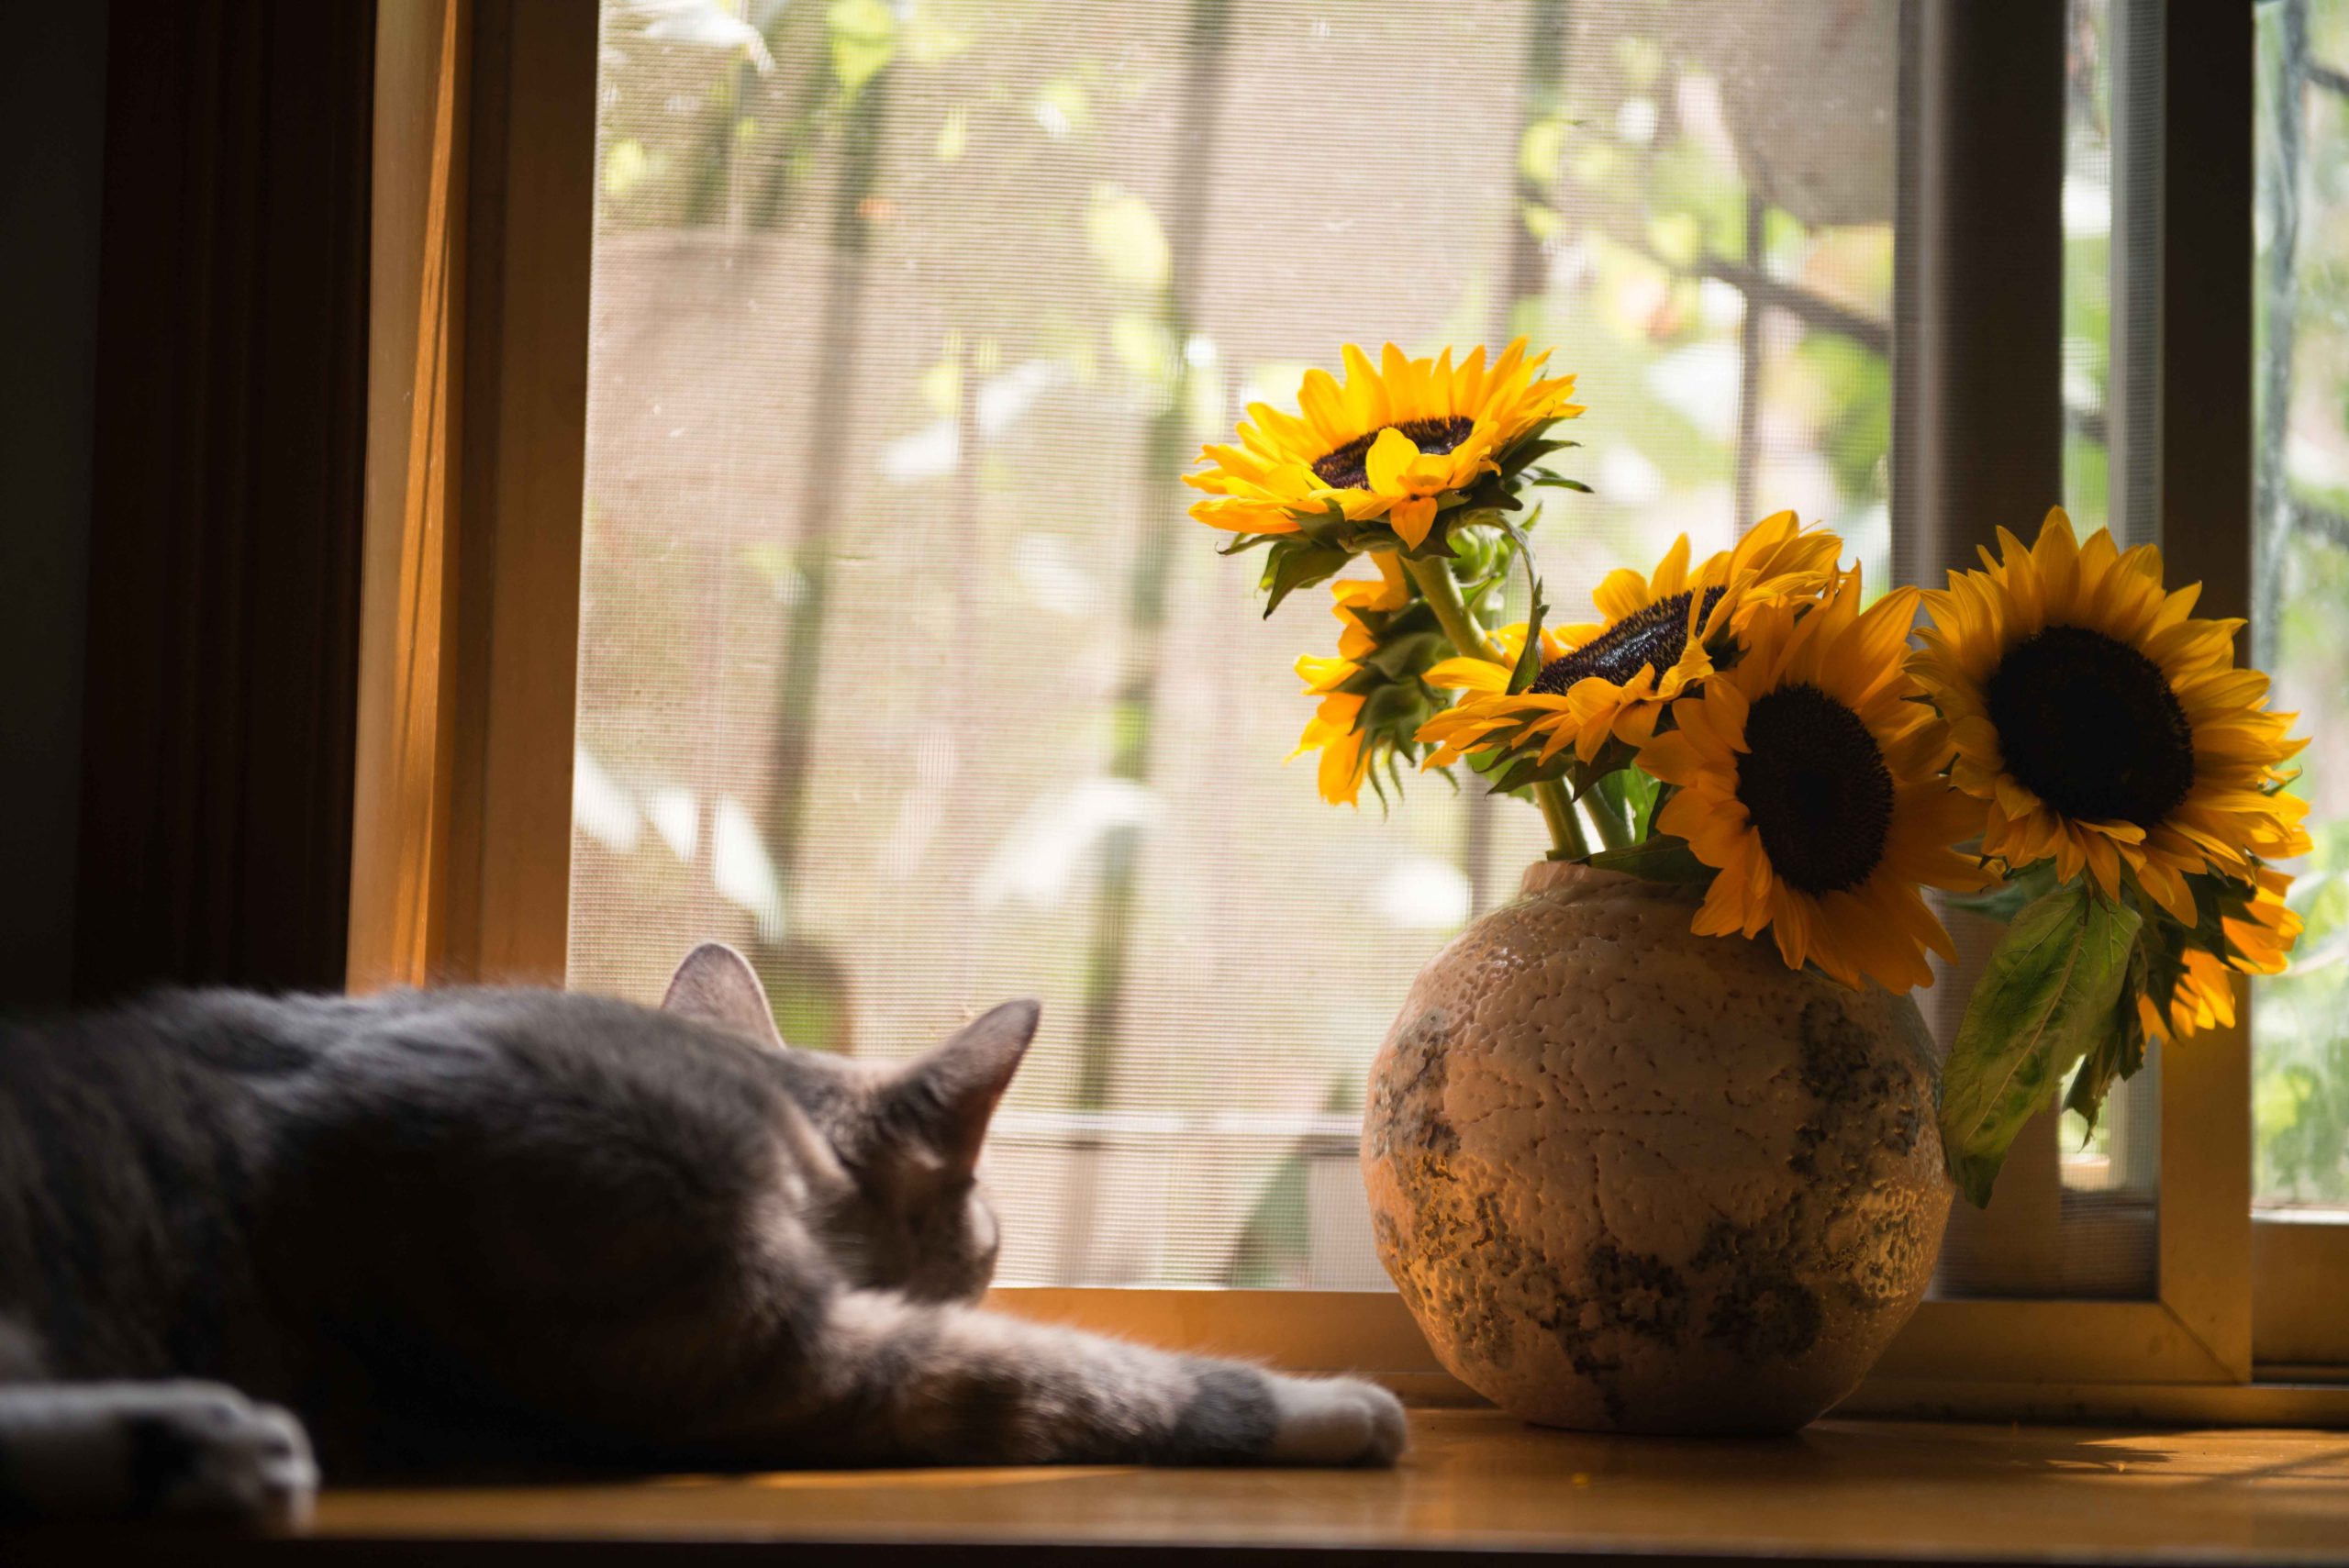 A grey cat luxuriates in the sun next to a large pottery vase of giant sunflowers